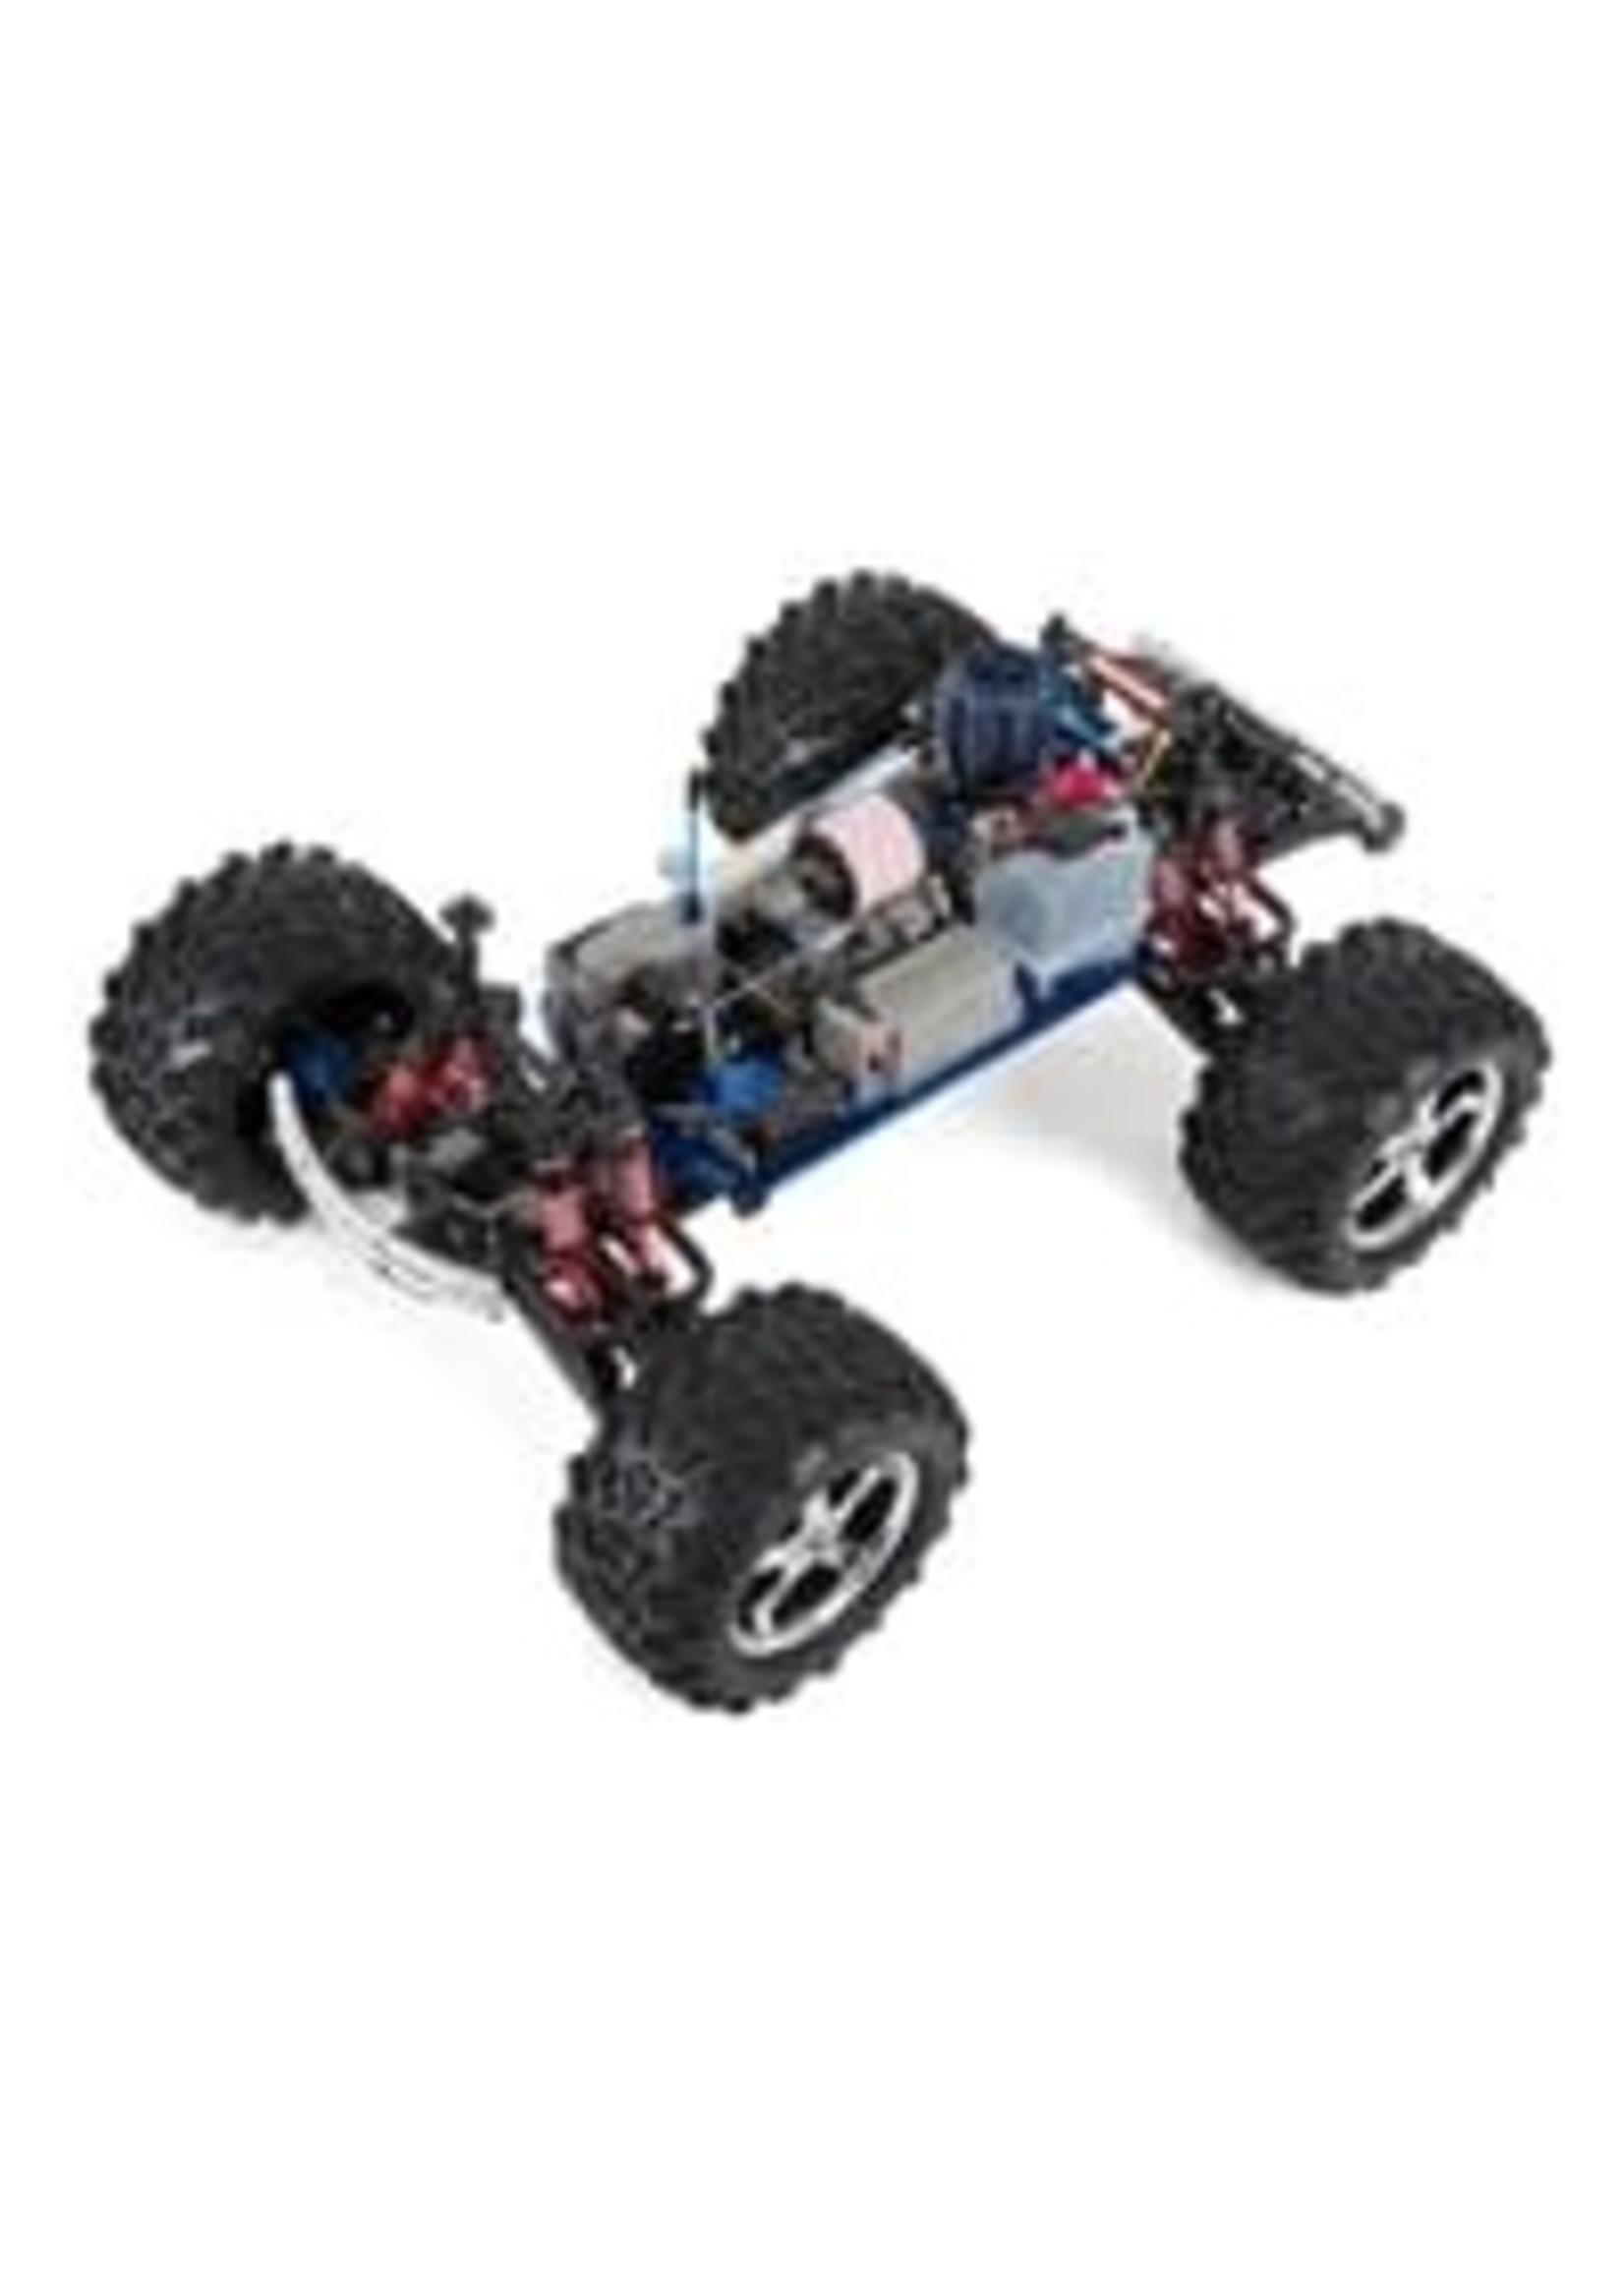 Traxxas 49077-3-RED T-Maxx 3.3: 1/10 Scale Nitro-Powered 4WD Maxx Monster Truck with TQi 2.4GHz Radio System, Traxxas Link  Wireless Module, and Traxxas Stability Management (TSM)